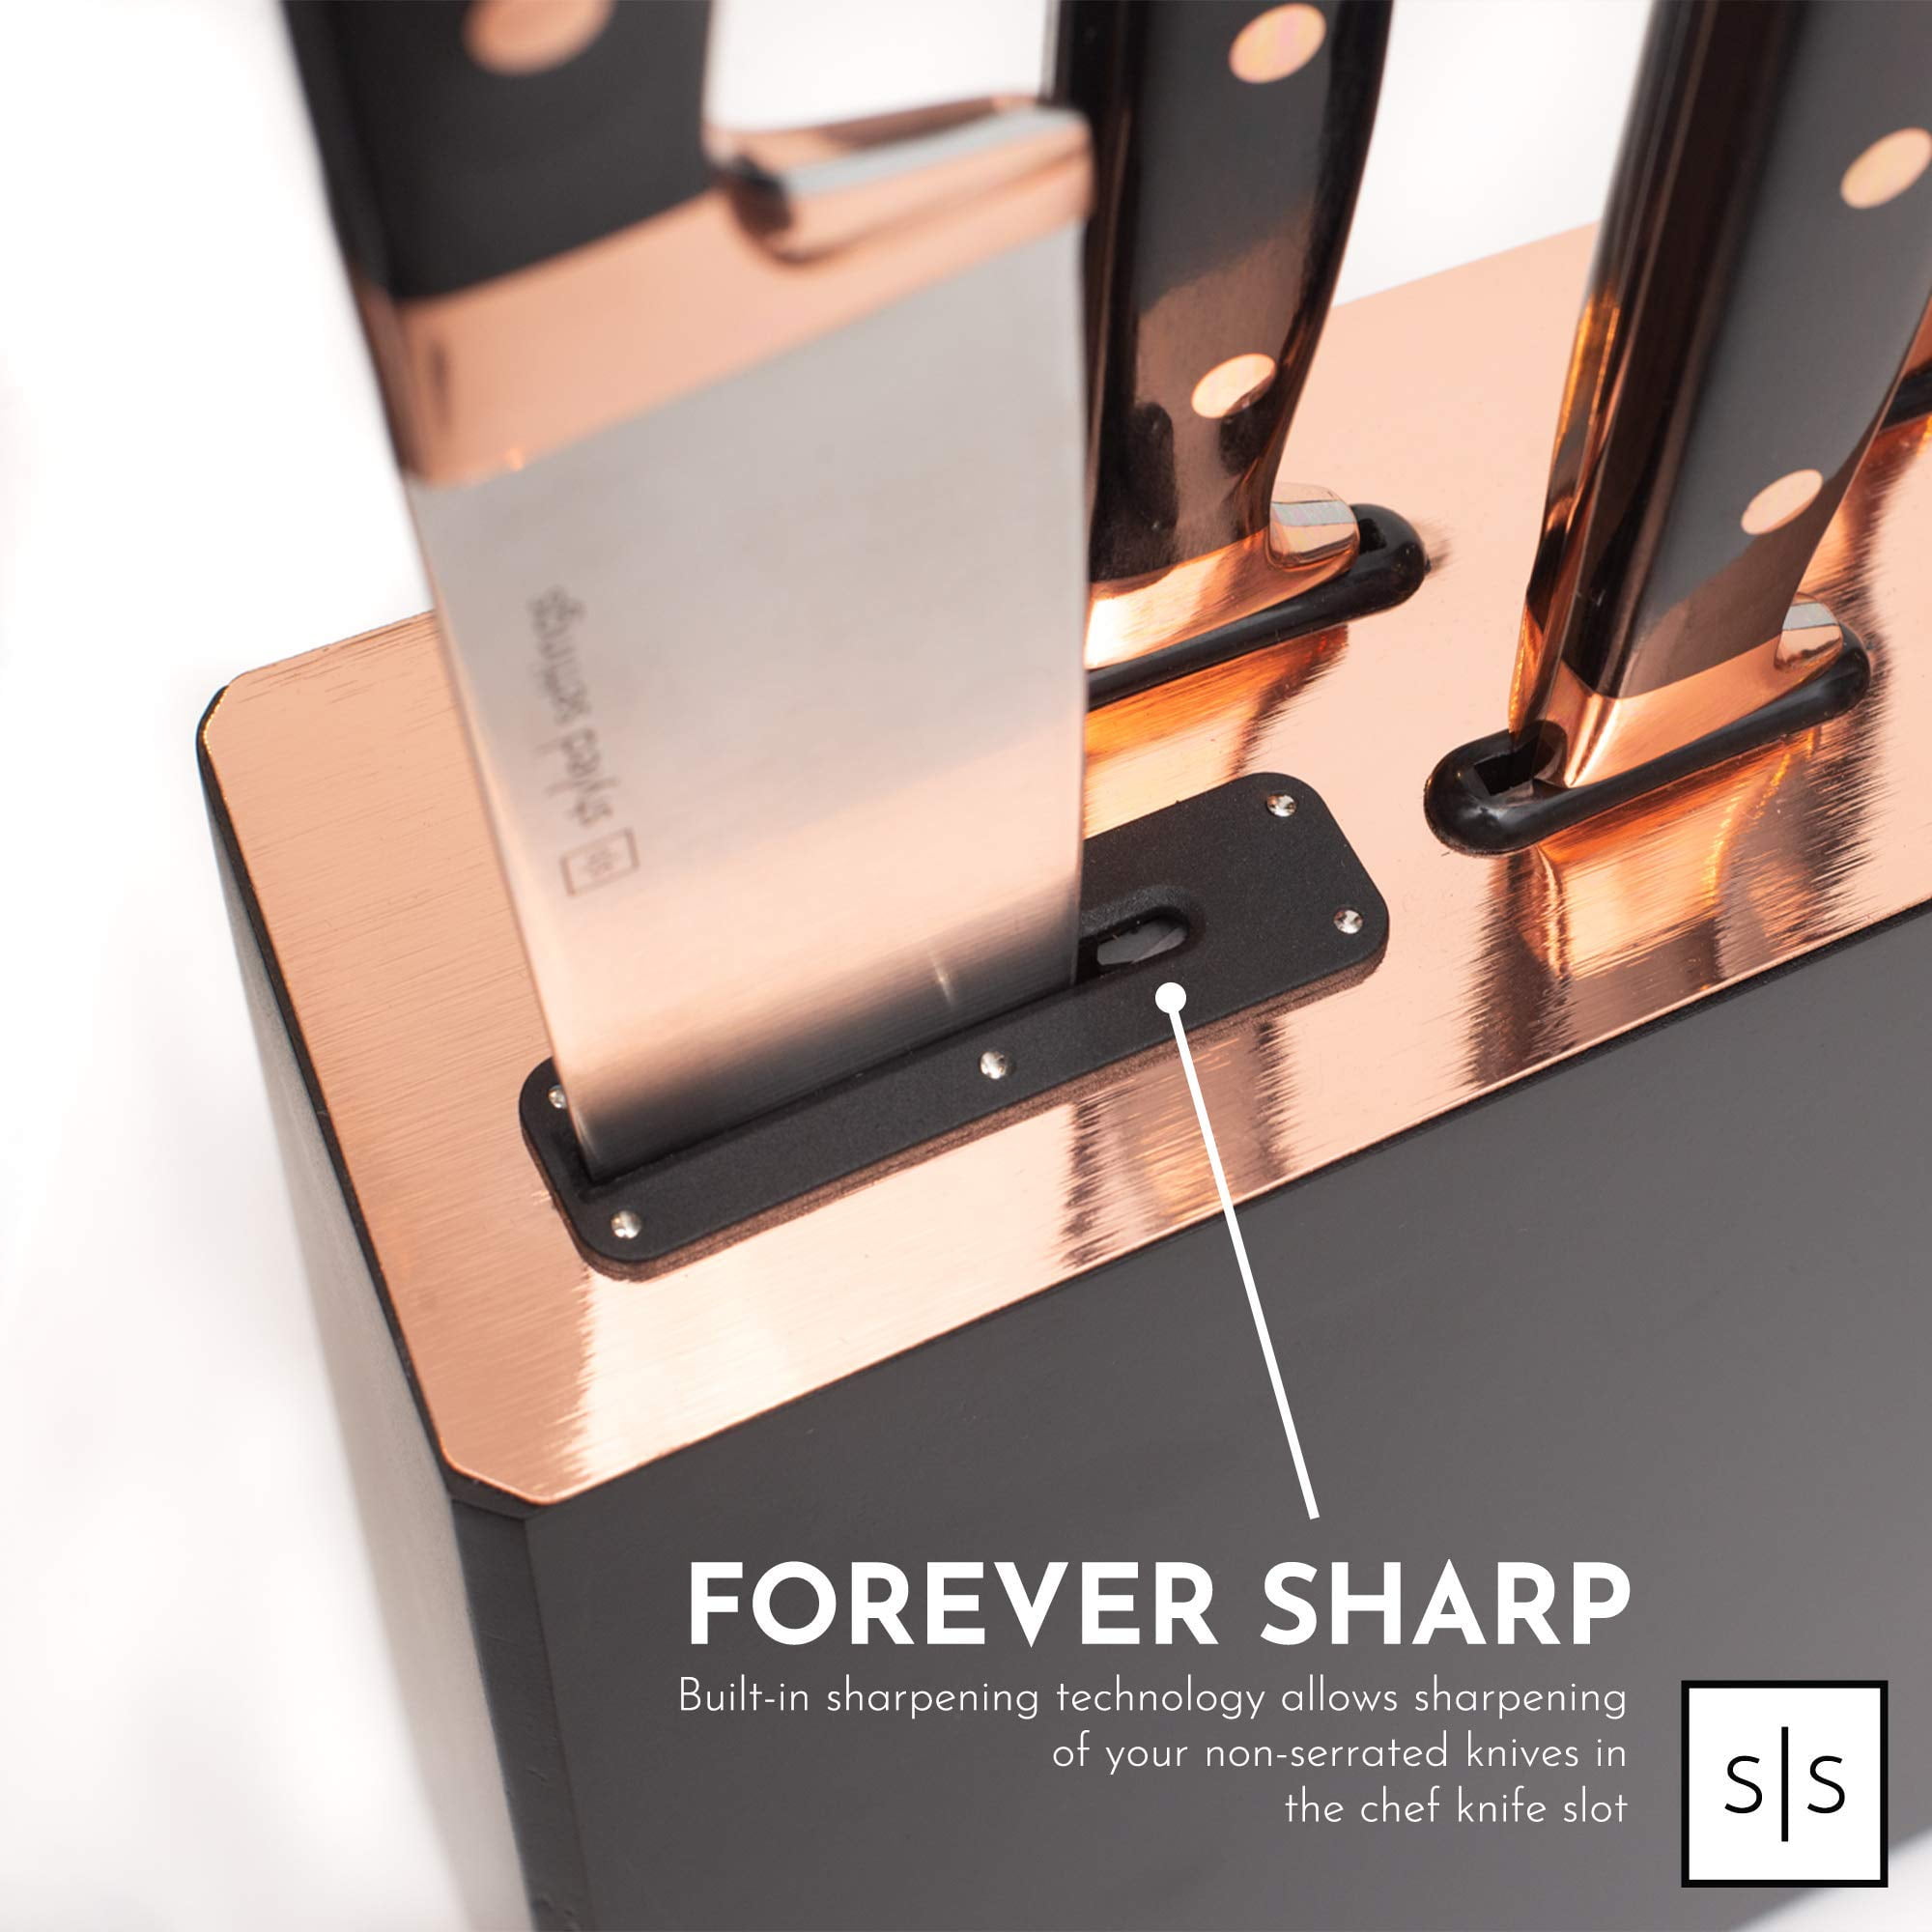 Styled Settings Copper Knife Set with Sharpening Block, Bronze